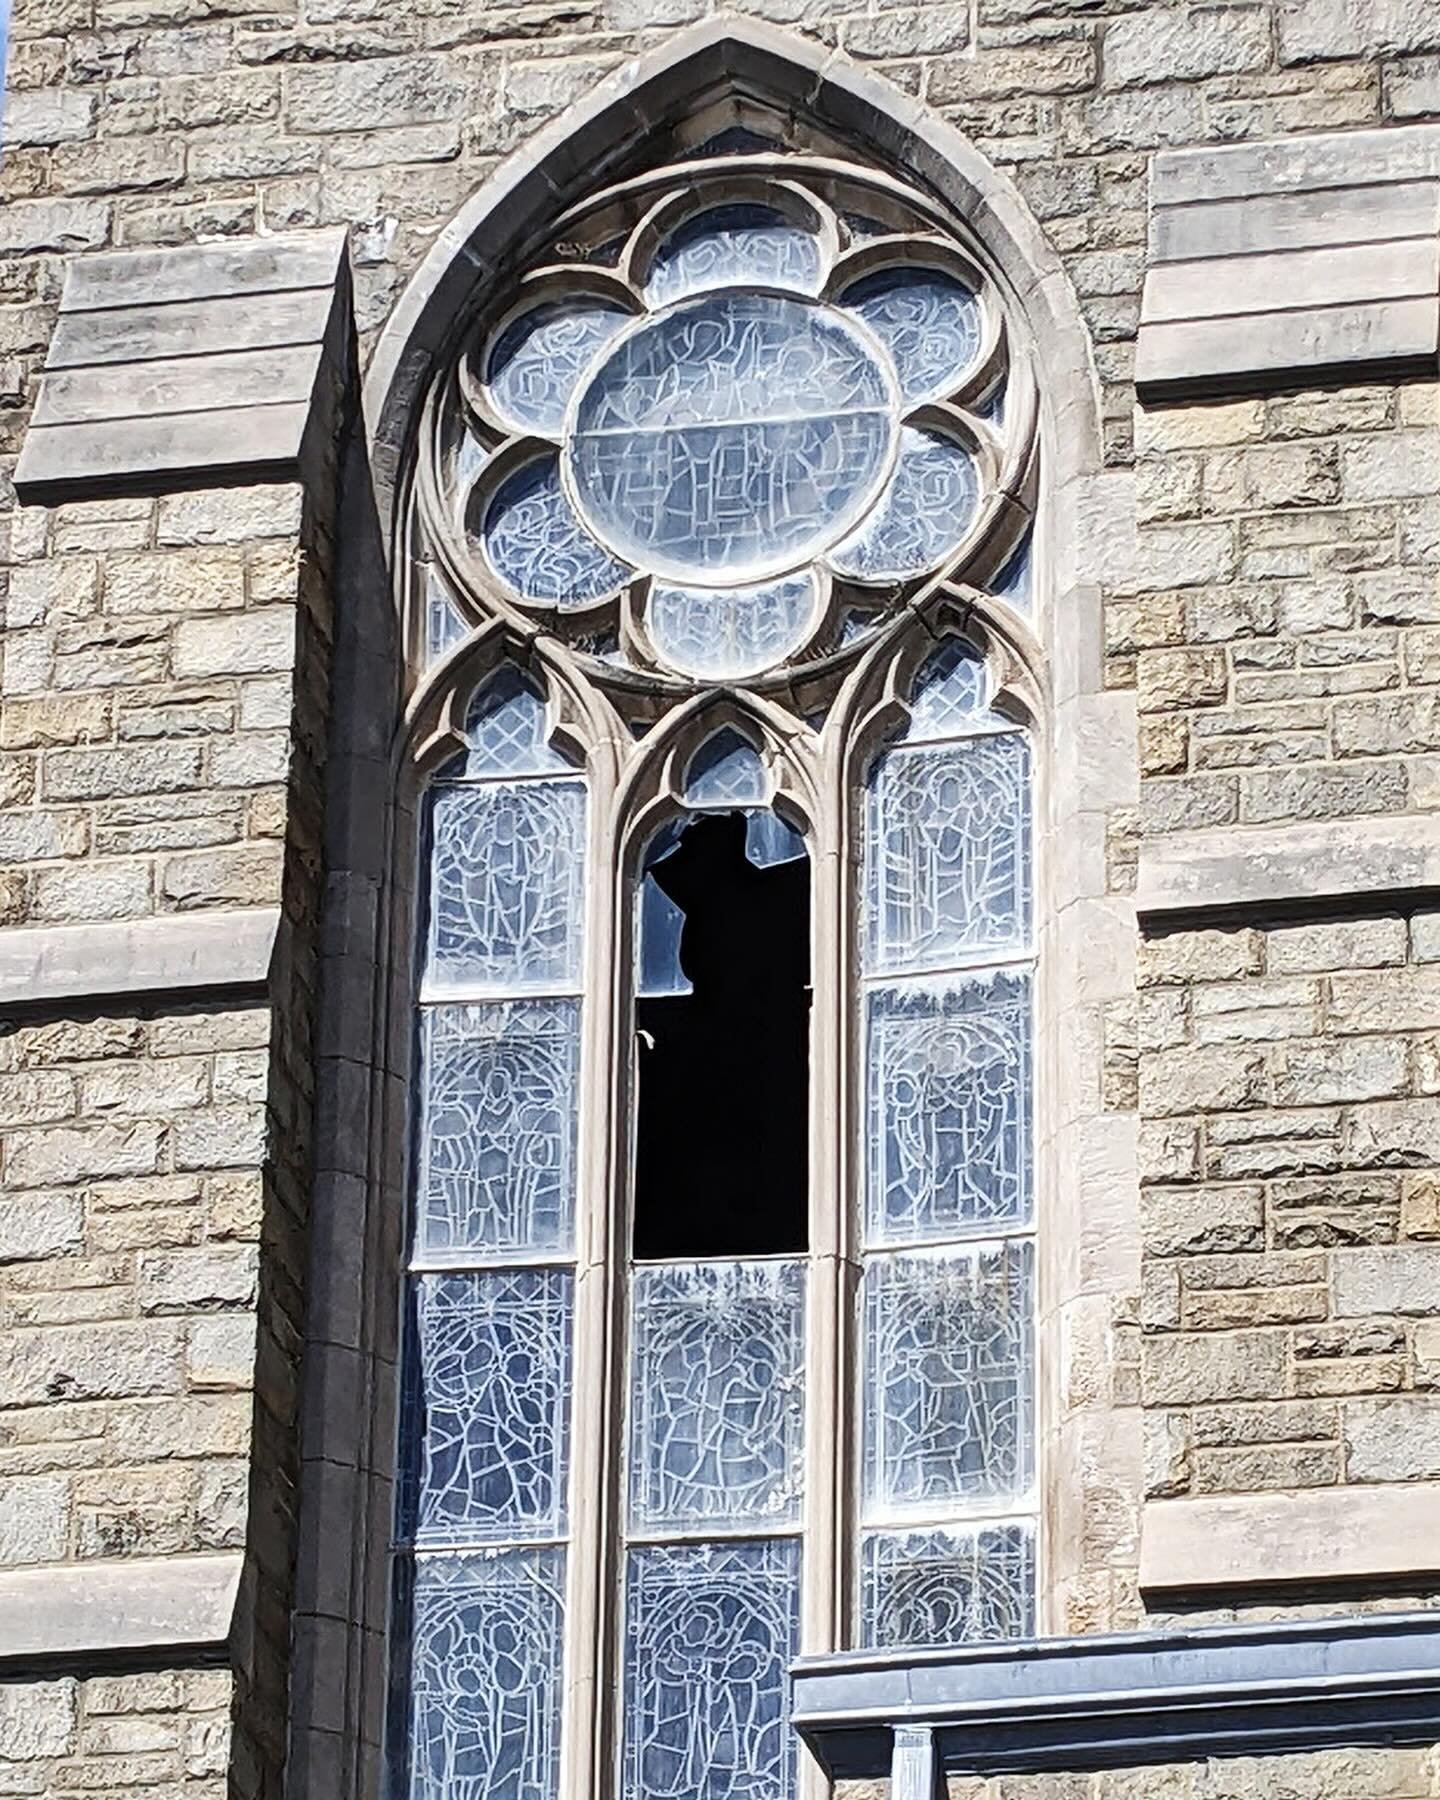 Sad news: A cherished stained glass window at the Sacred Heart Church in Jersey City was needlessly shattered, damaging a piece of art crafted by master glassman Wright Goodhue. 

🔍 We are actively investigating this incident and working to prevent 